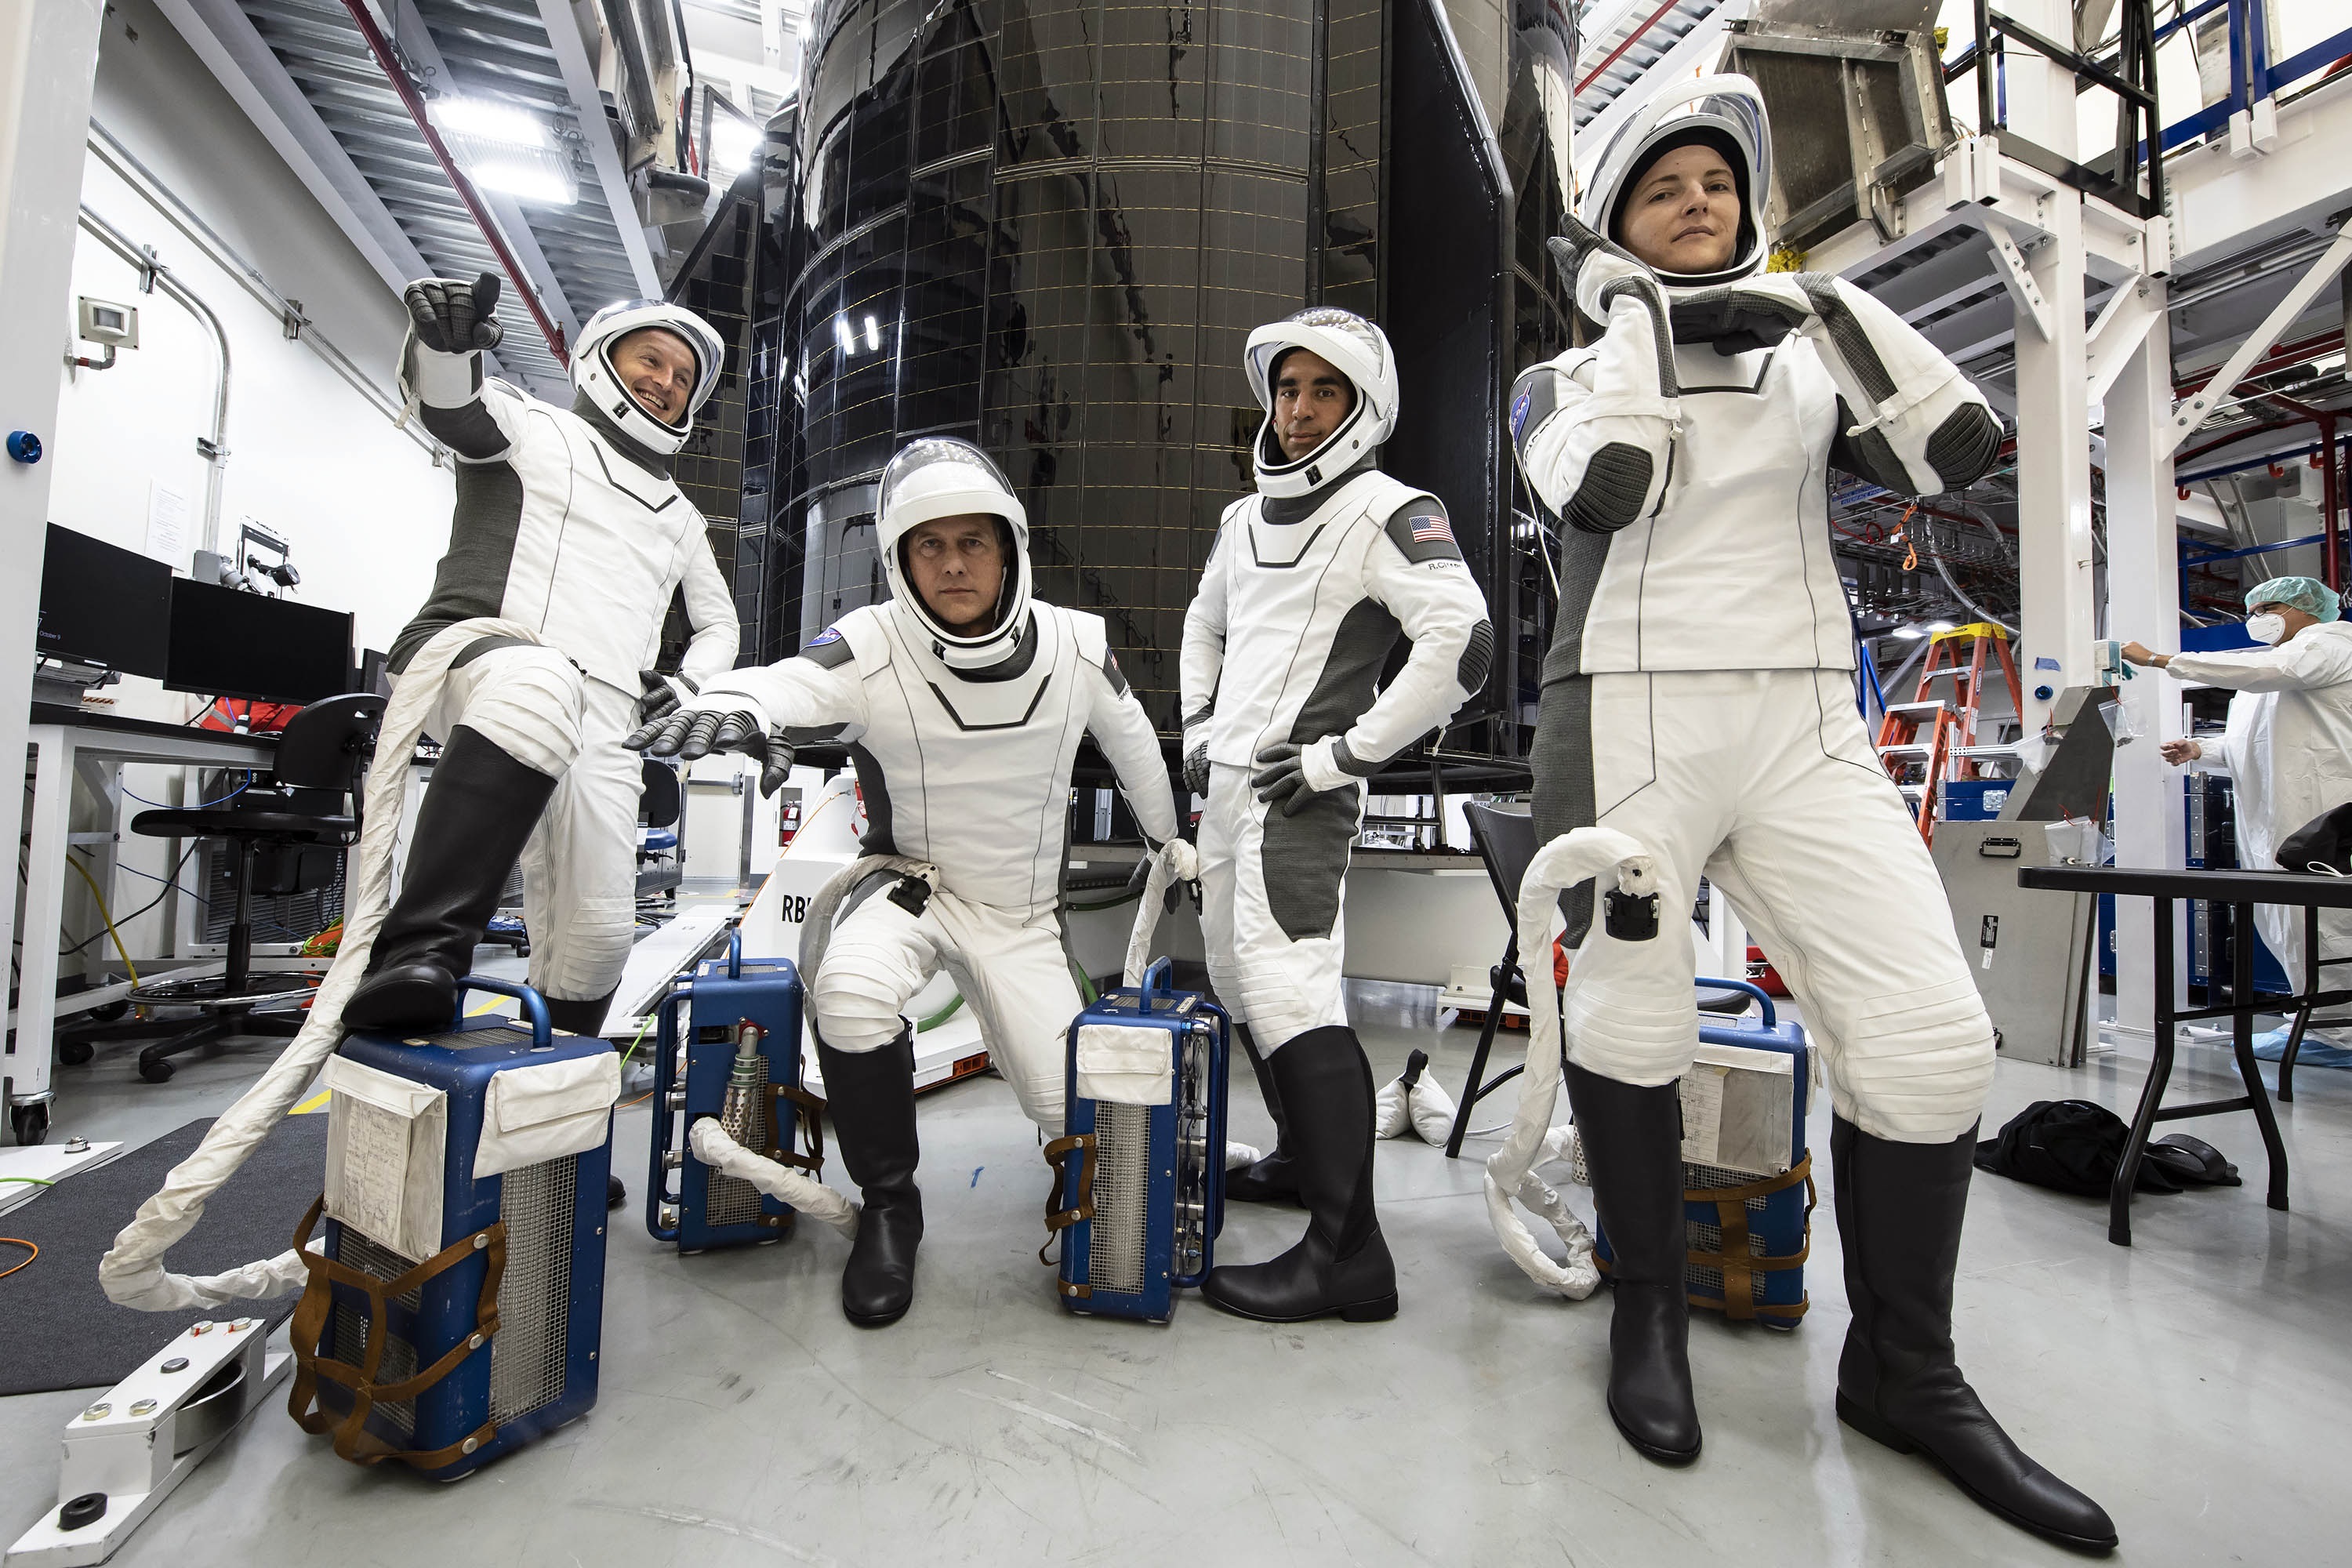 SpaceX Crew-3 Astronauts Test Out Their Spaceflight Hardware